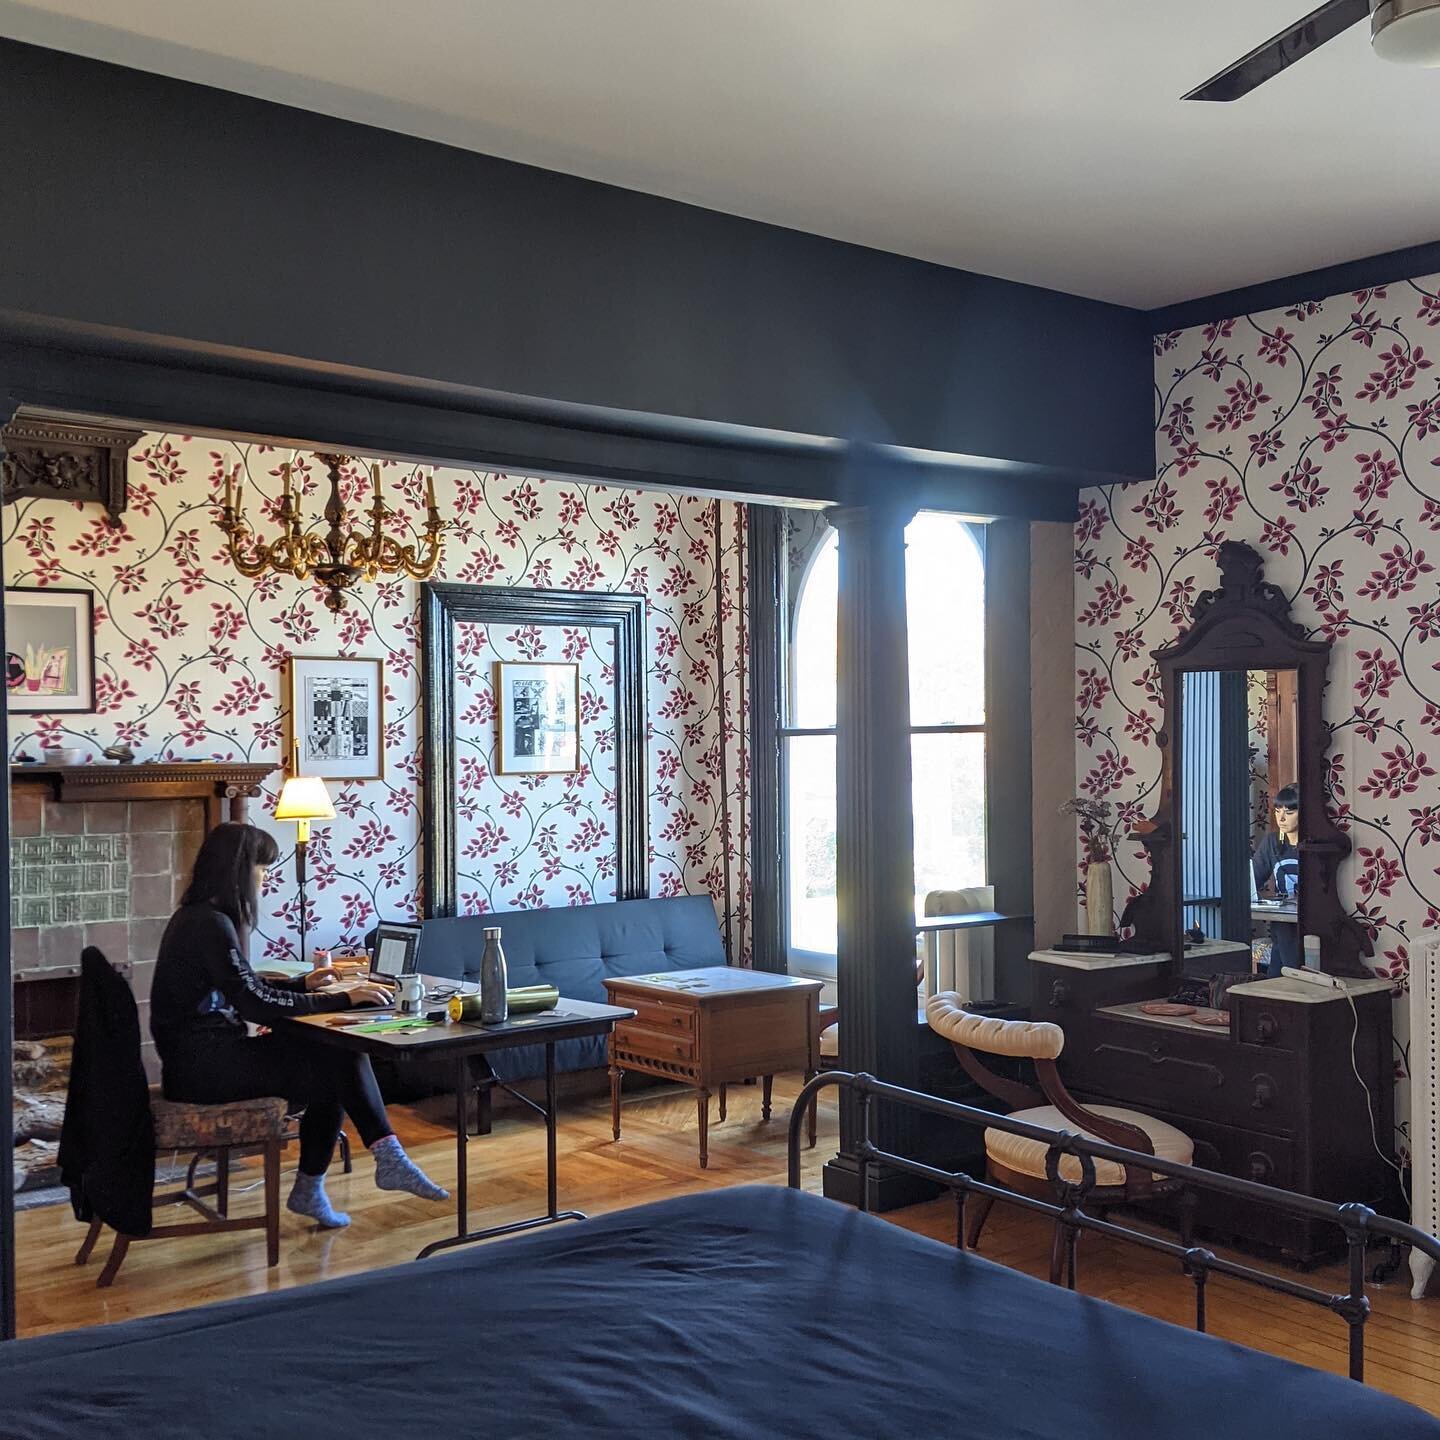 When we visited Wedding Cake House (a project of Dirt Palace) in Providence, RI, the 3+ story historic mansion was under renovation by Dirt Palace organizers and a whole host of contributing artists working to make the space livable and uniquely beau